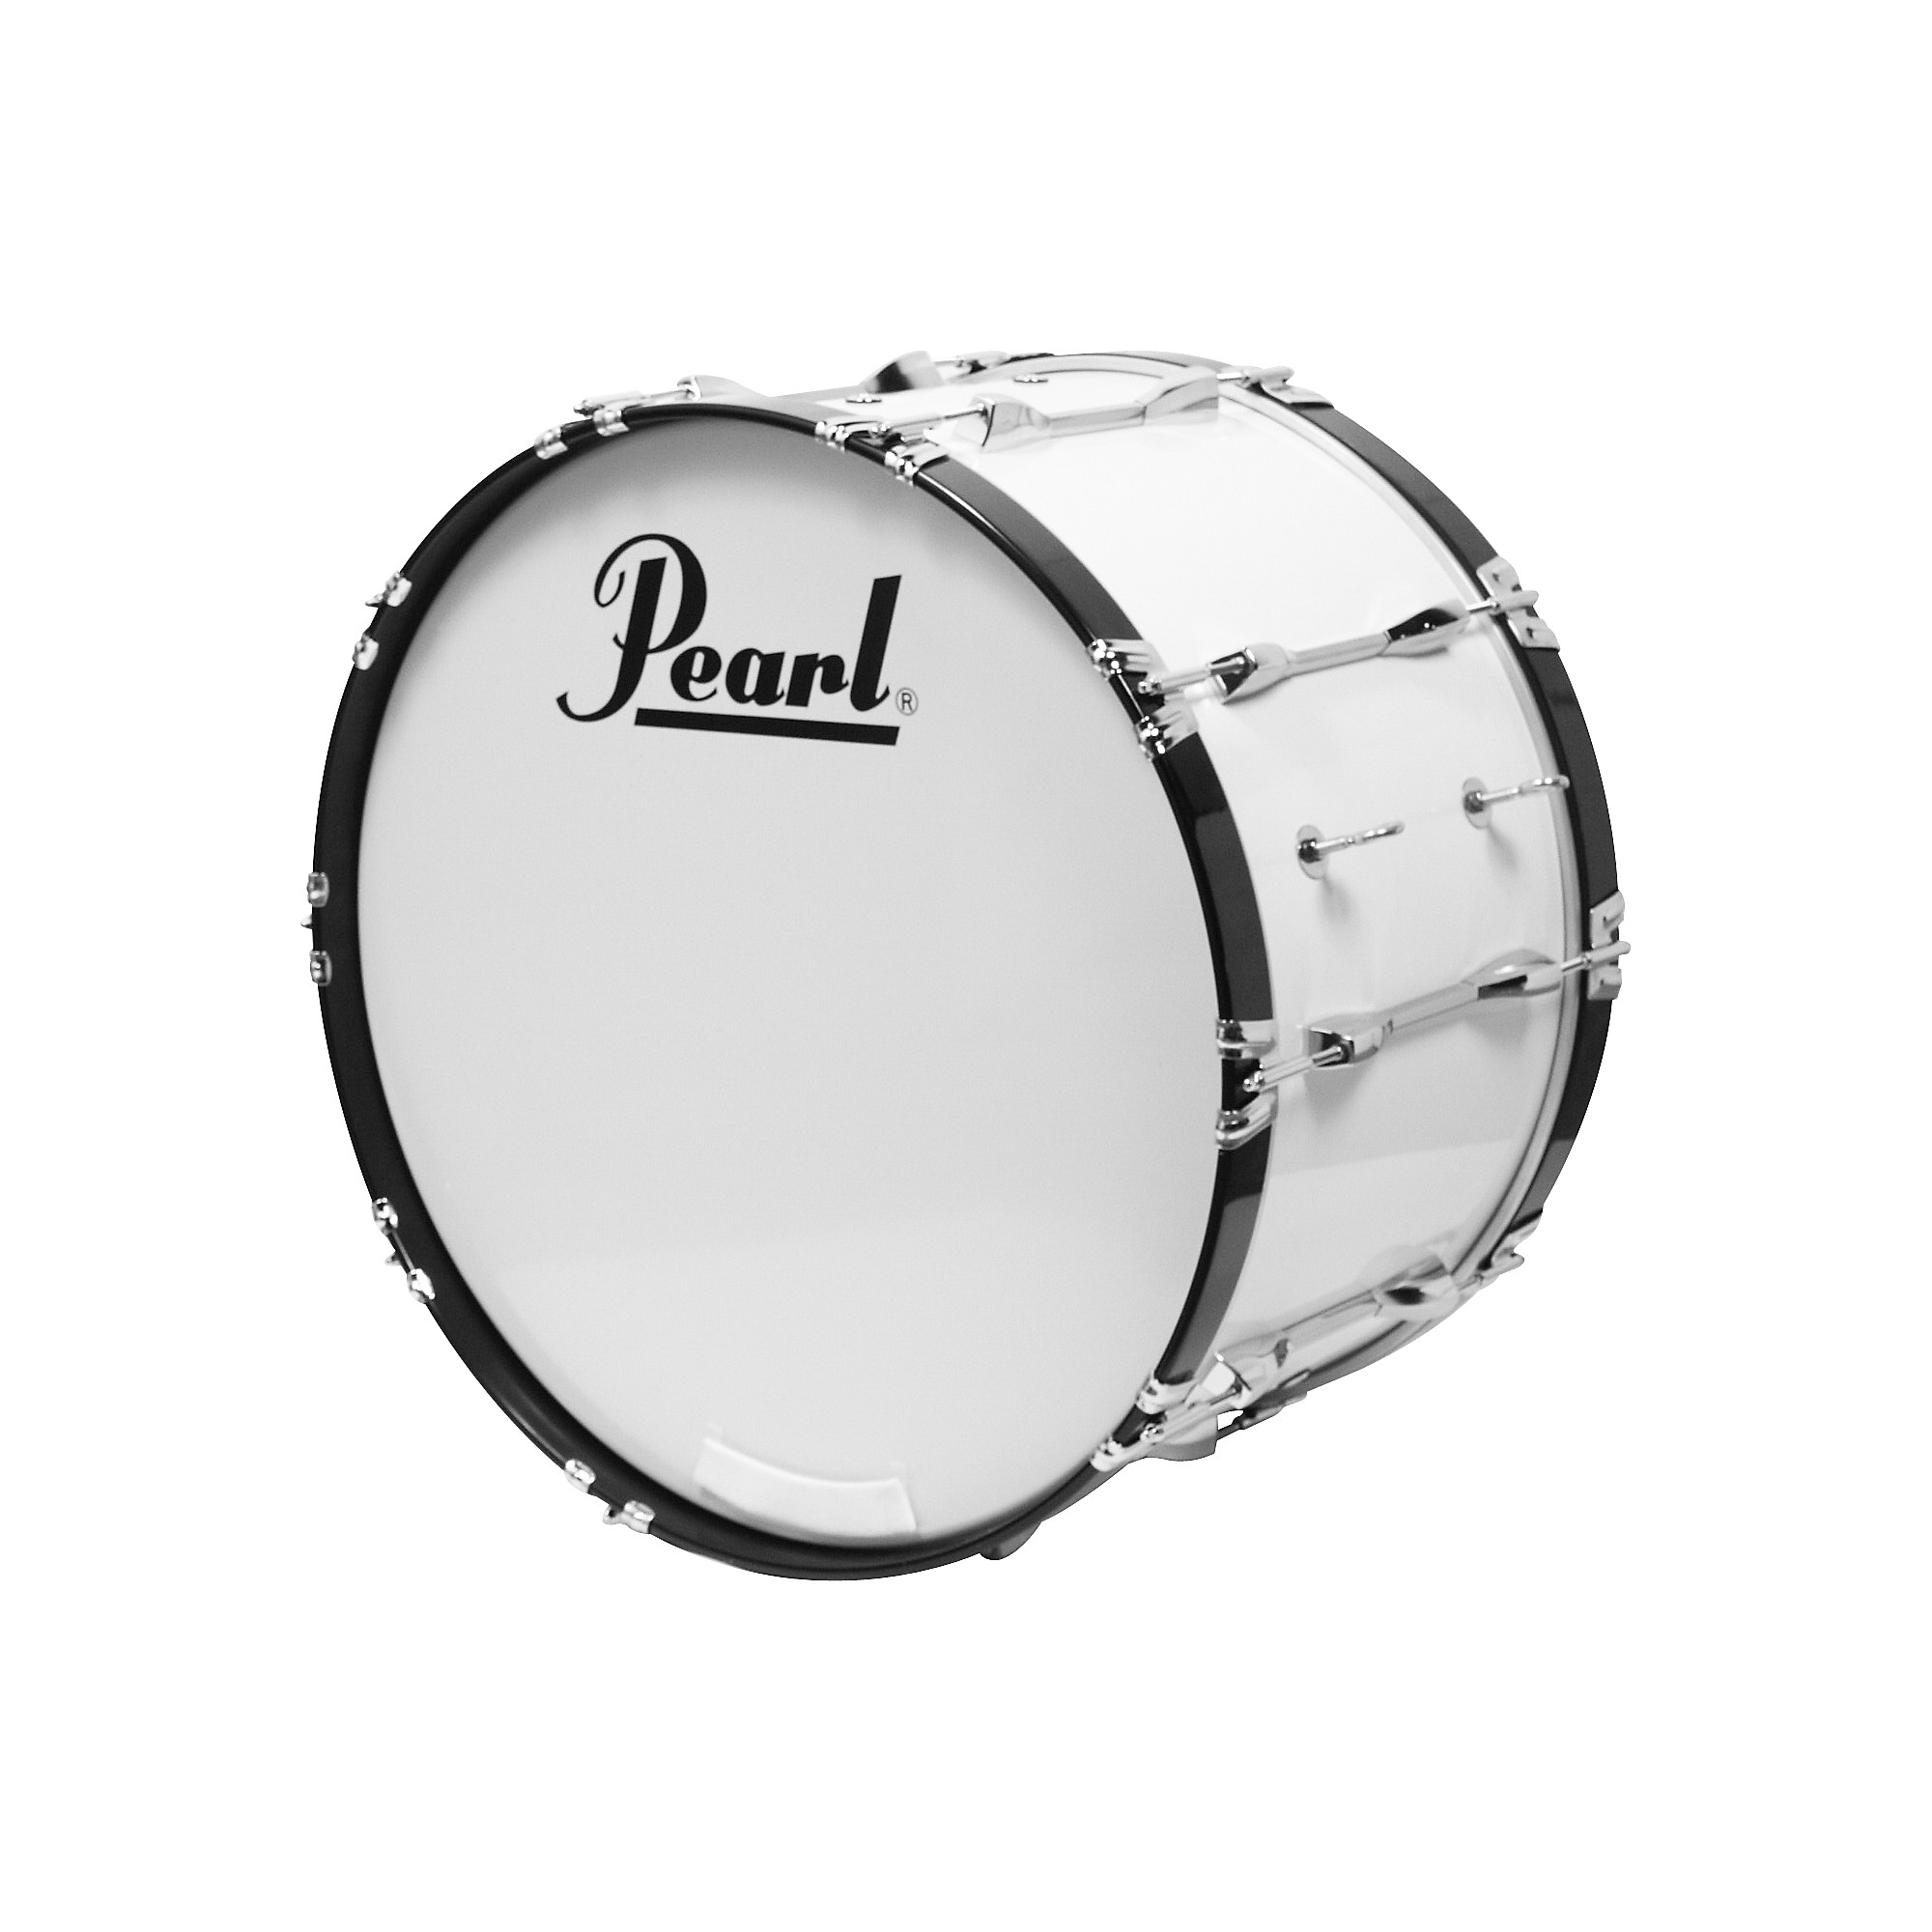 Pearl Competitor Marching Bass Drum Pure White (#33) 20x14